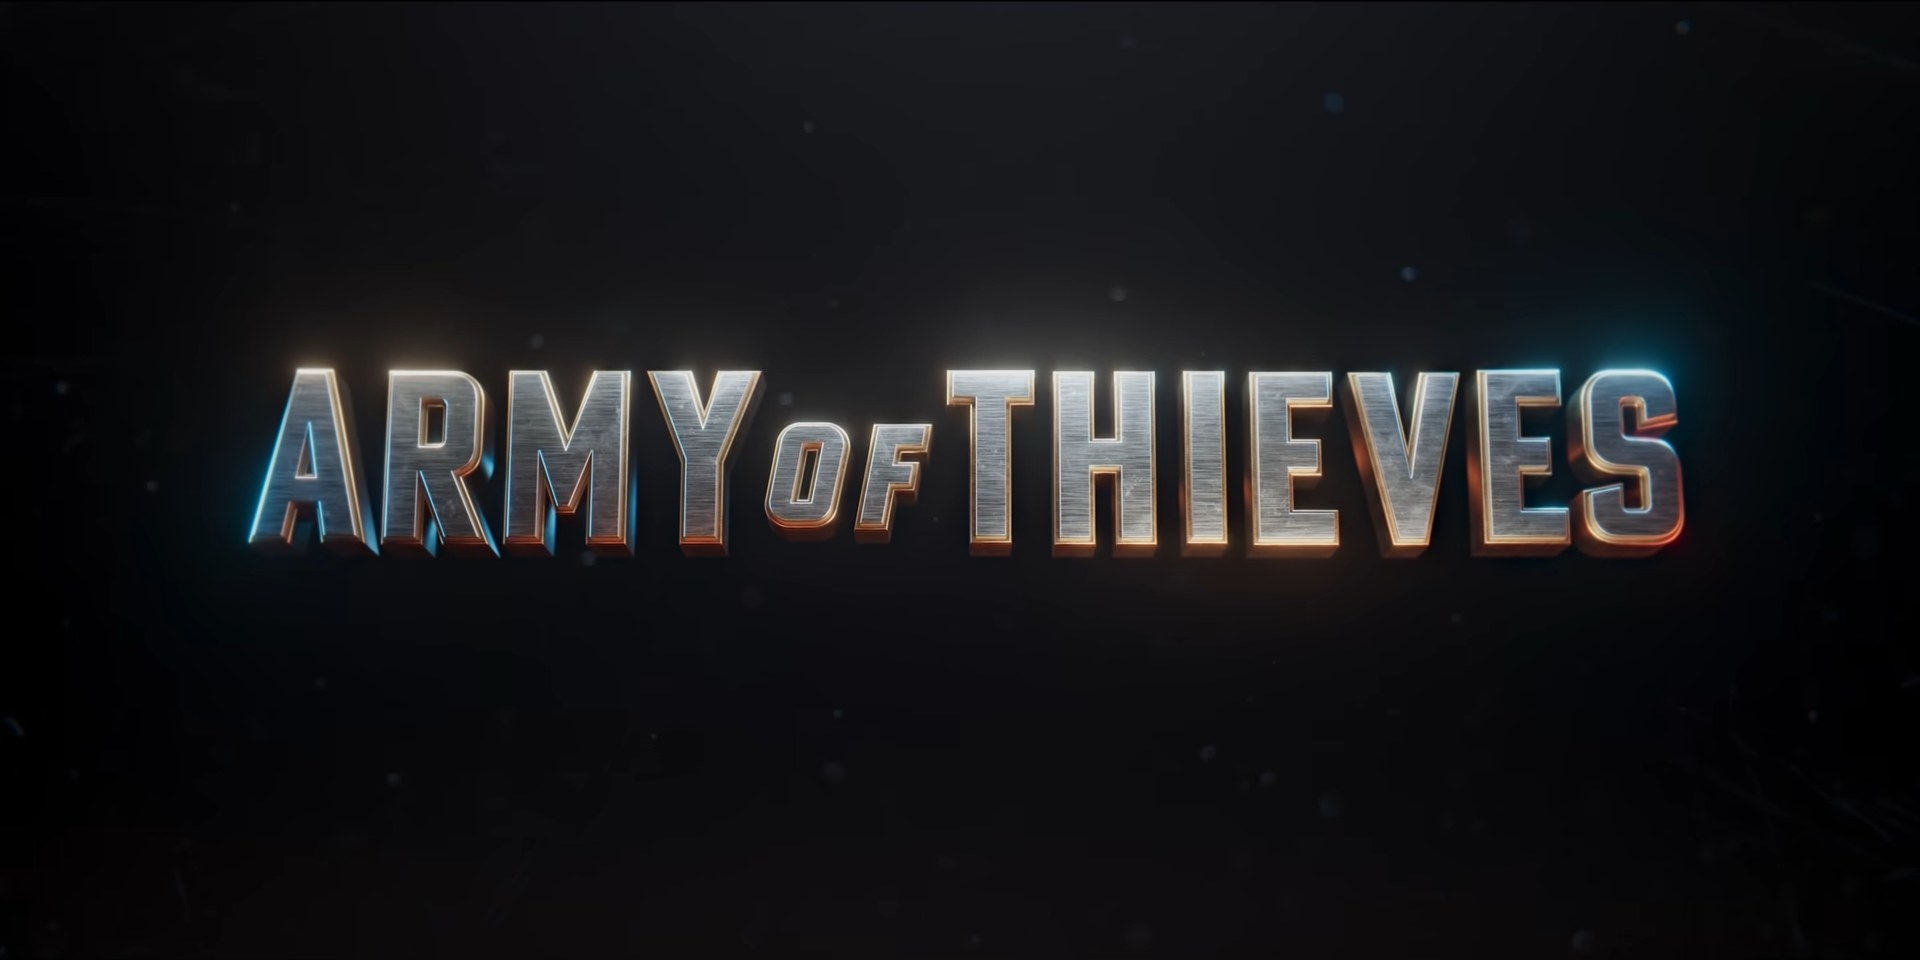 Cast army of thieves Army Of